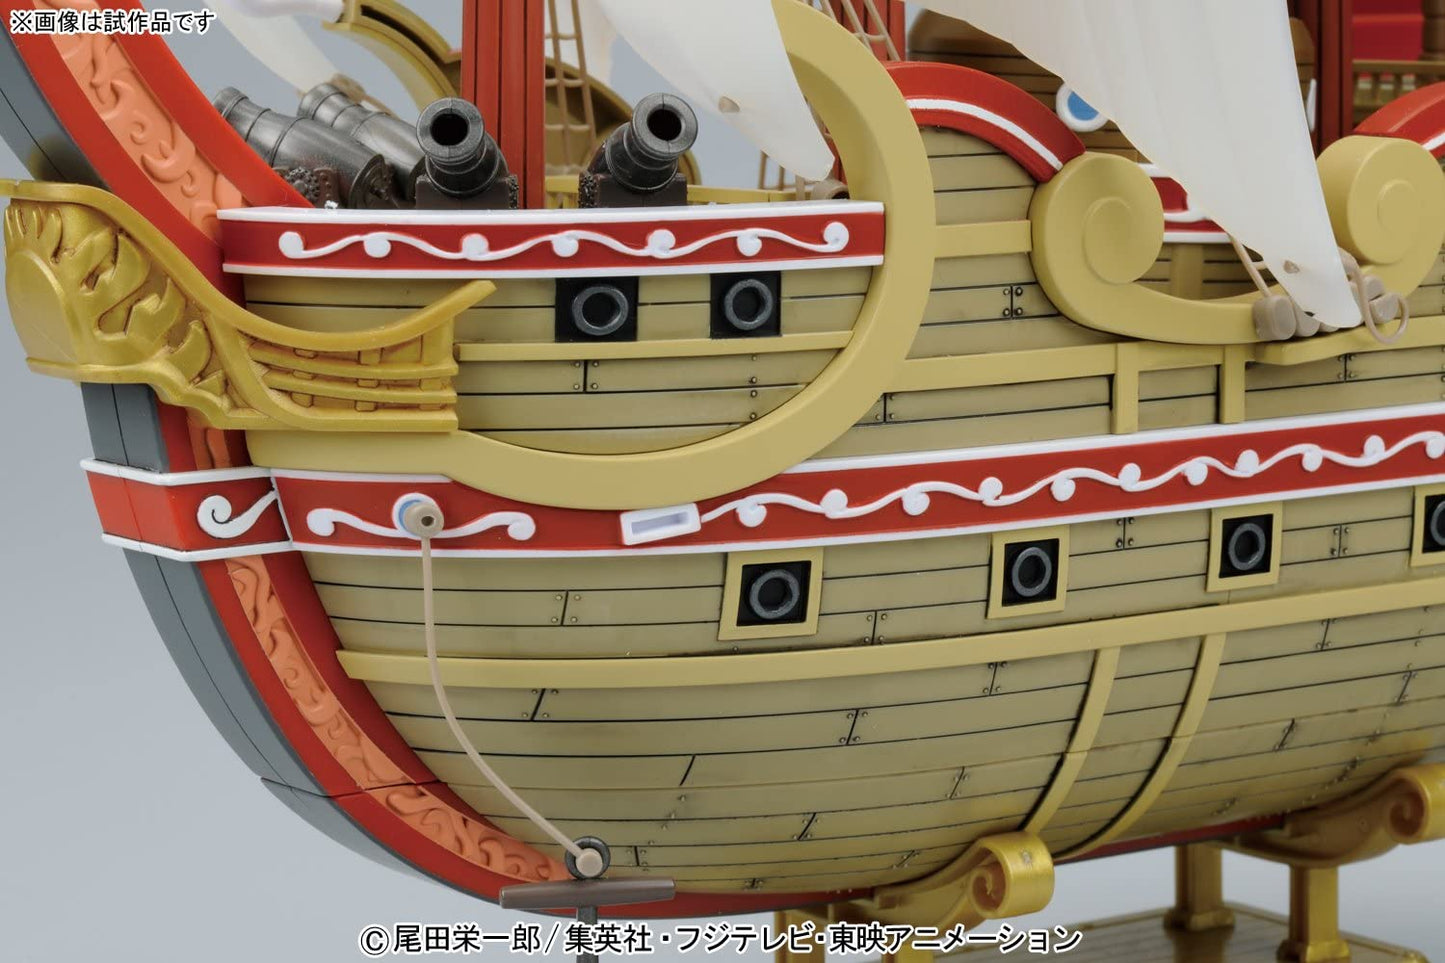 One Piece Sailing Ship Collection - Red Force